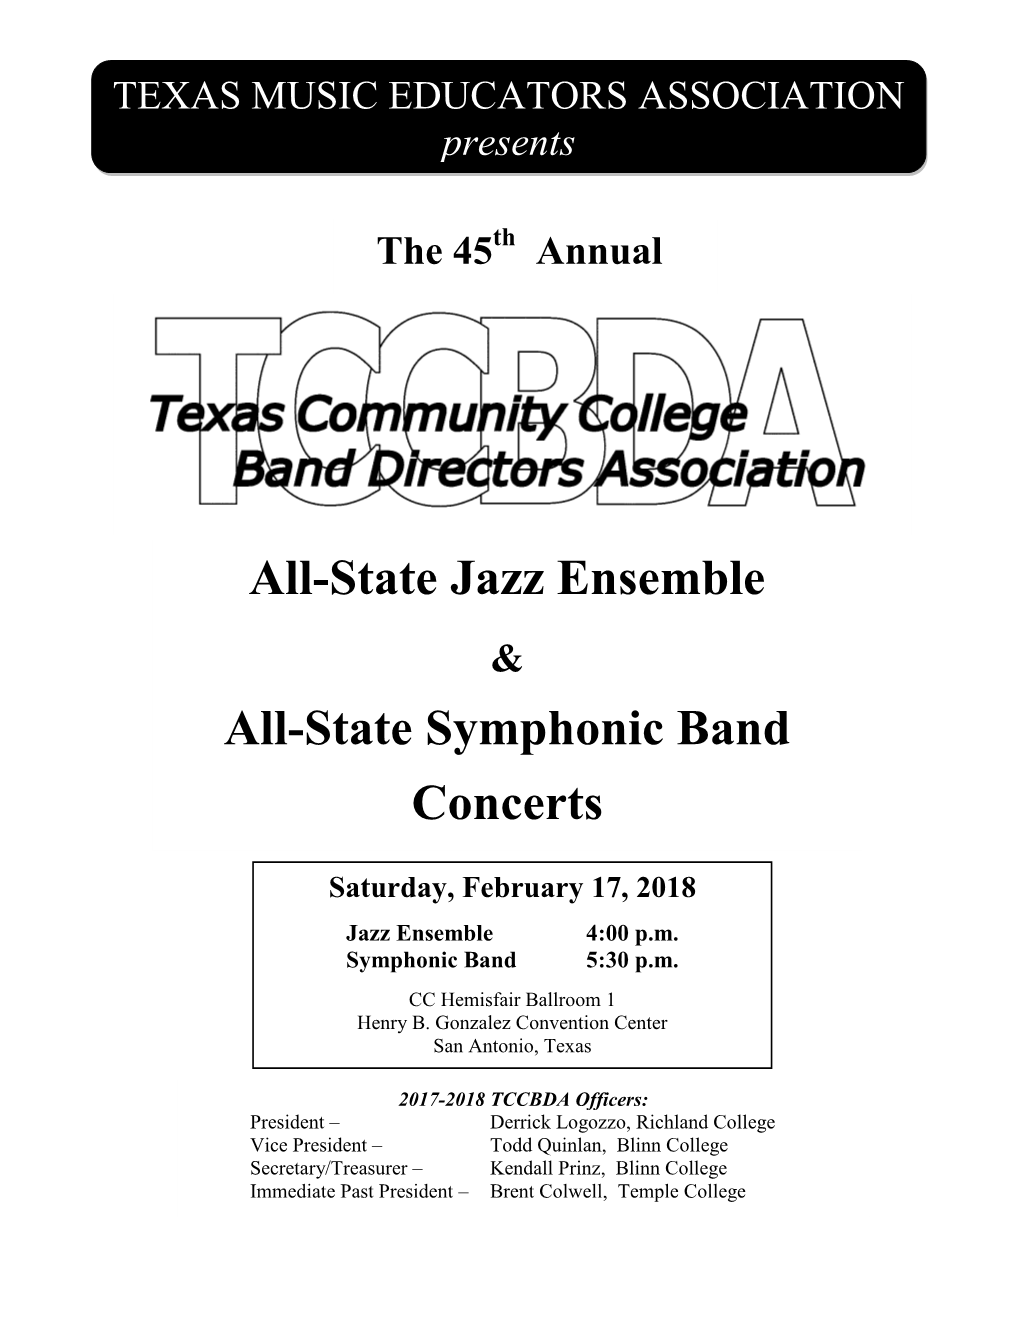 All-State Jazz Ensemble All-State Symphonic Band Concerts